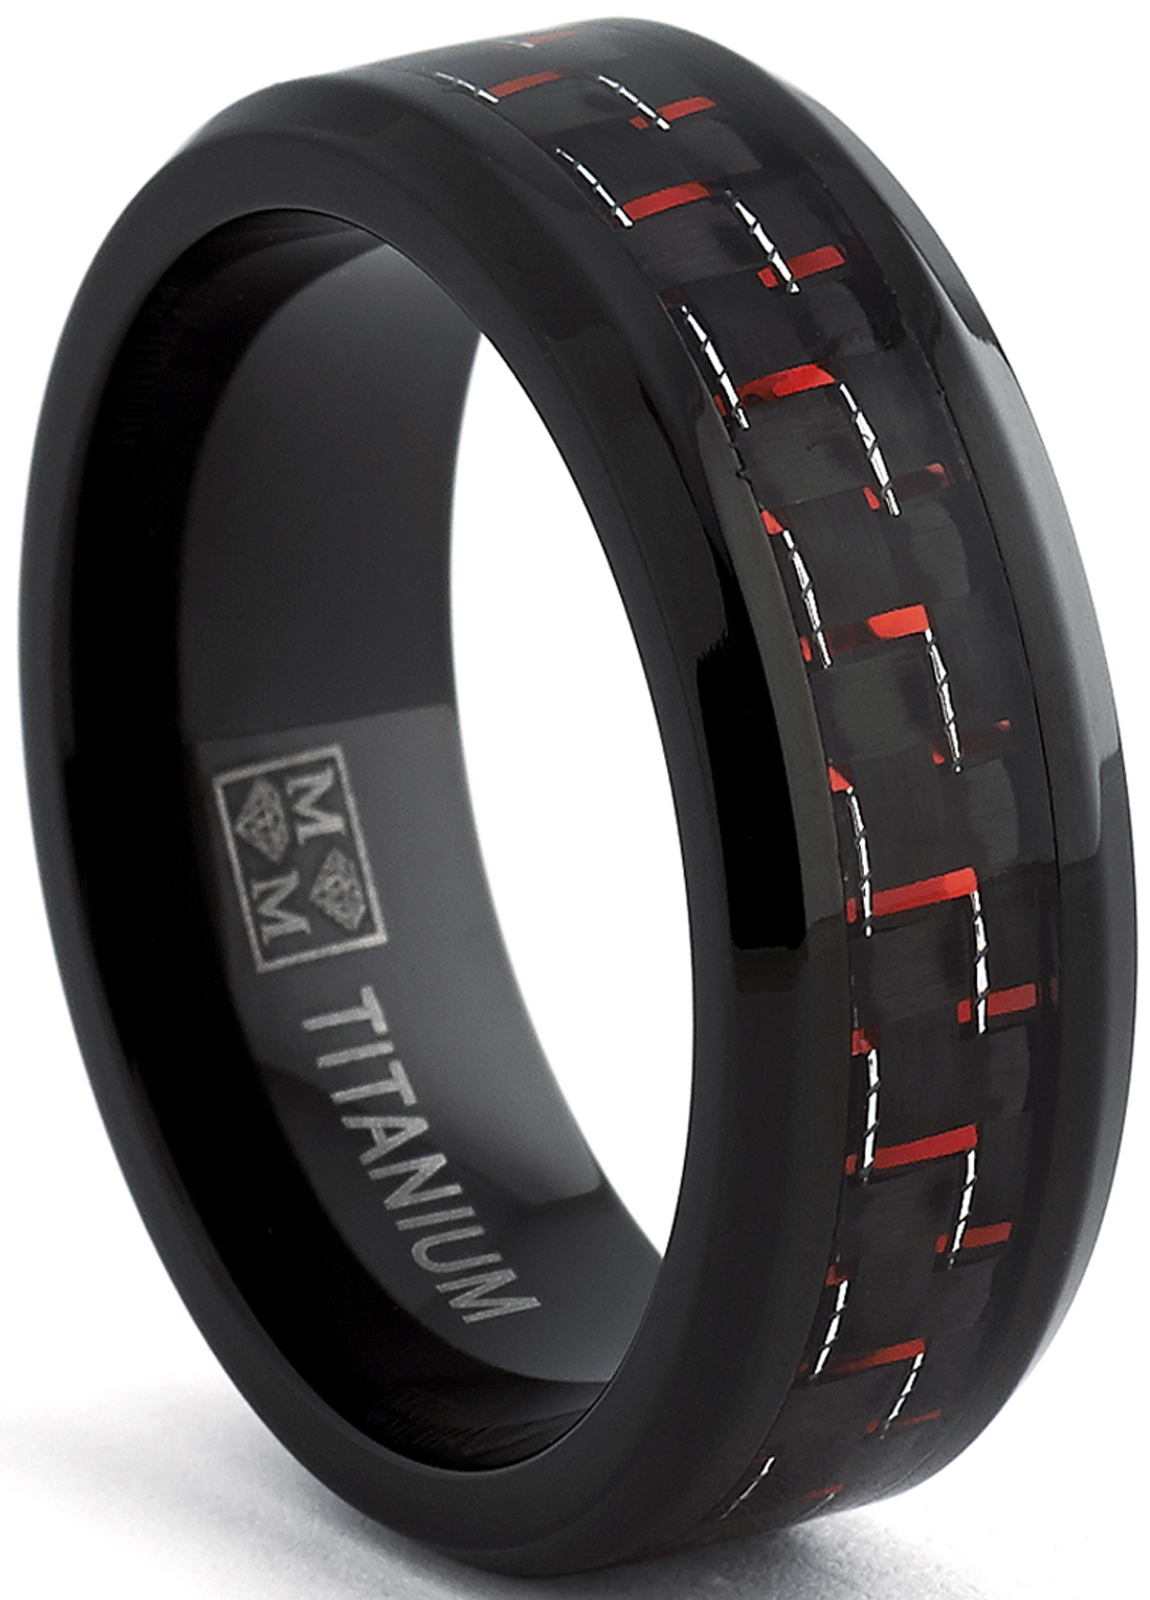 Metal Masters Co. Men's Black Titanium Wedding Band Ring with Black and Red Carbon Fiber inlay, Comfort fit 8mm, Sizes 7 to 13